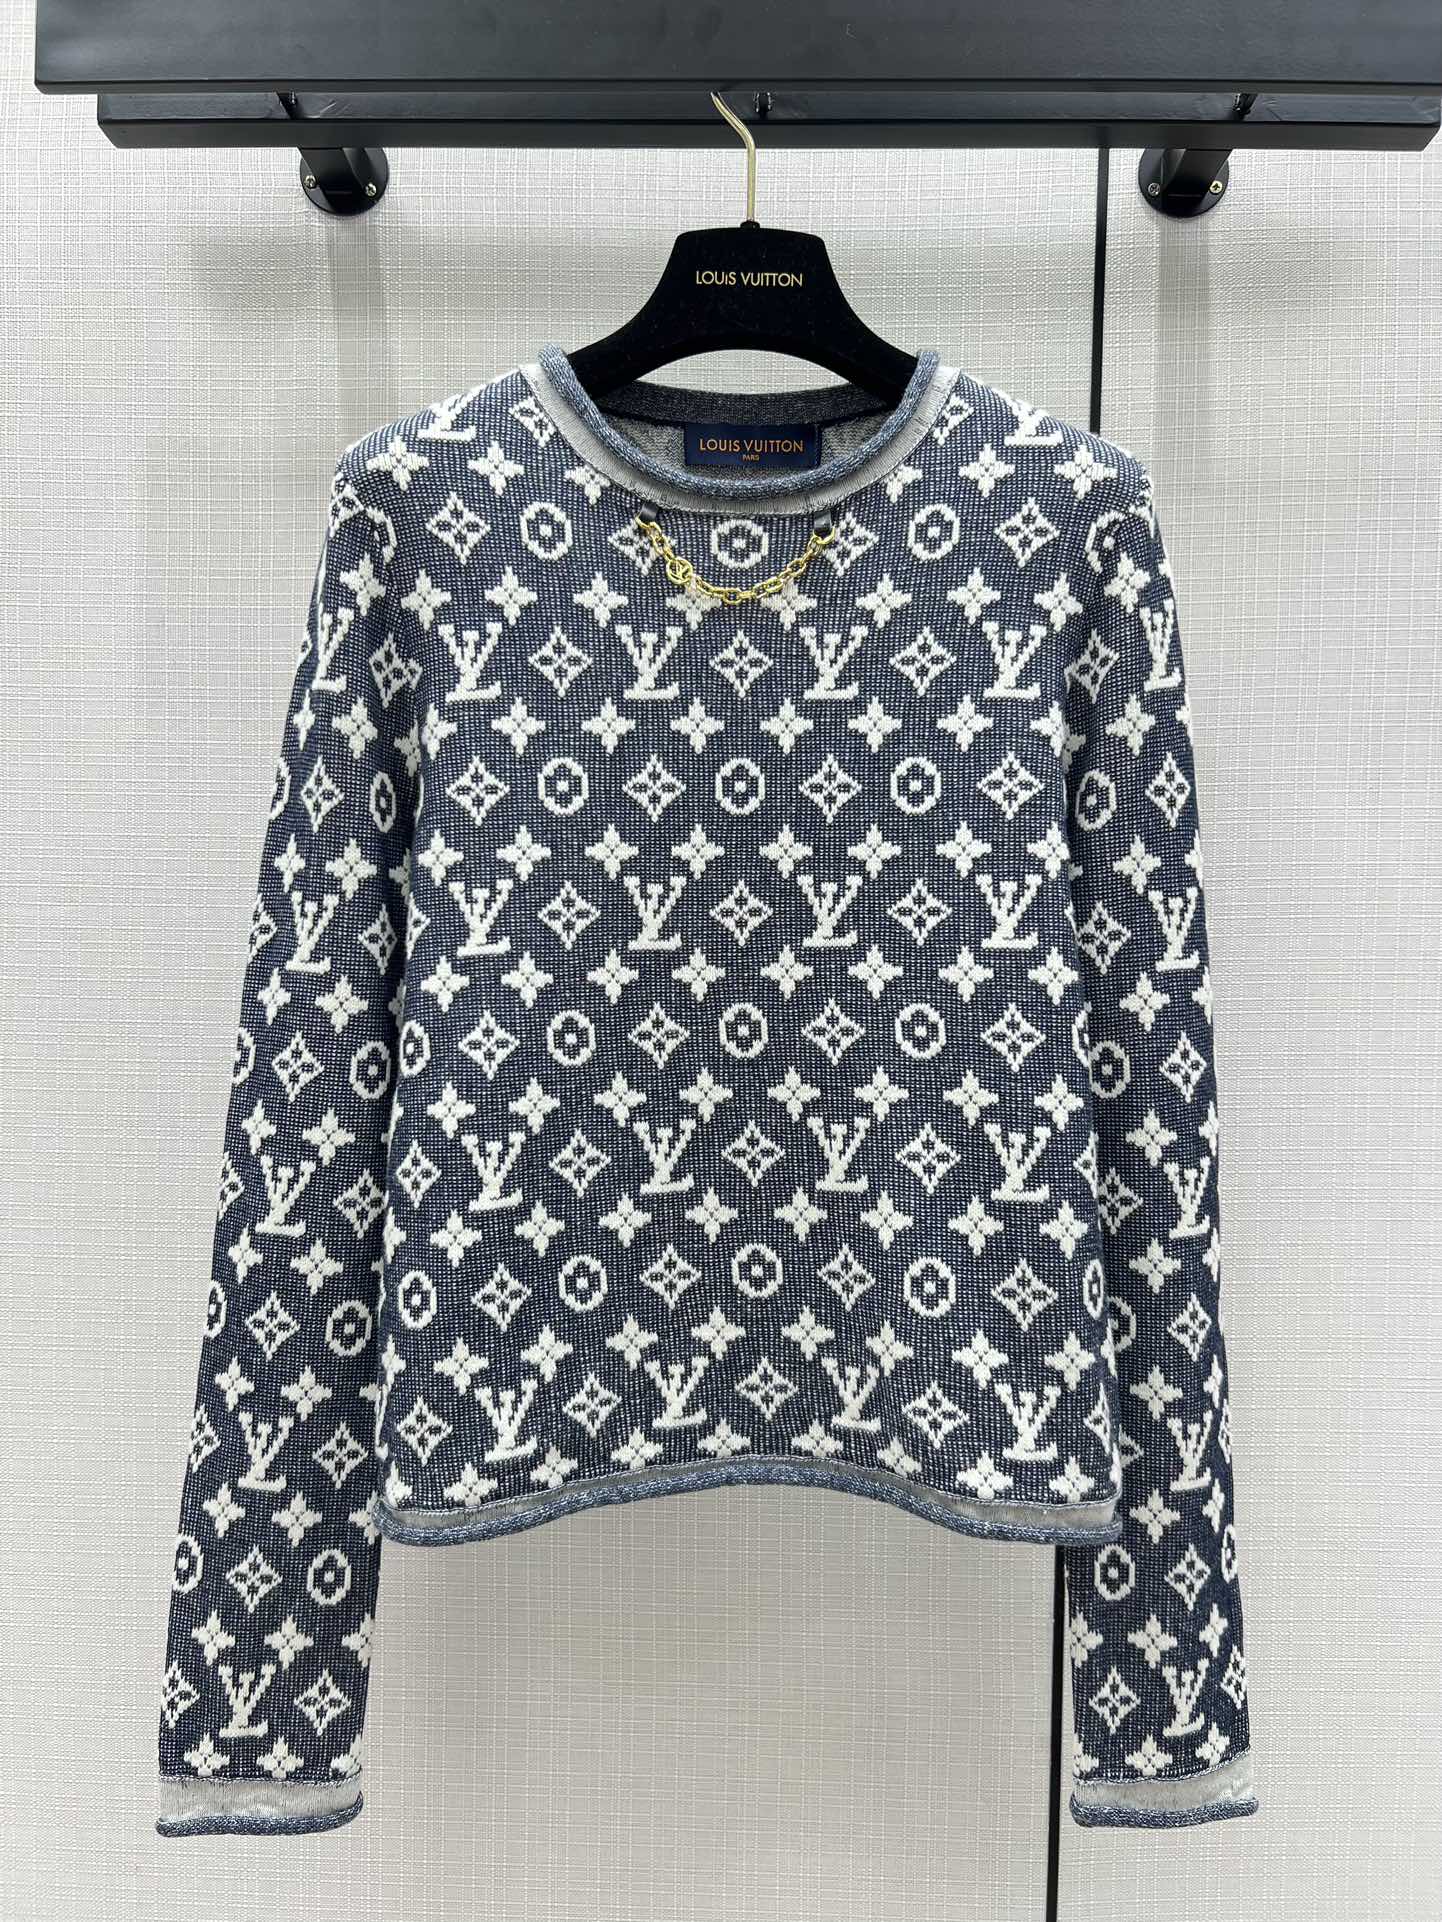 Louis Vuitton Clothing Shirts & Blouses Black Blue Grey White Knitting Wool Spring Collection Long Sleeve